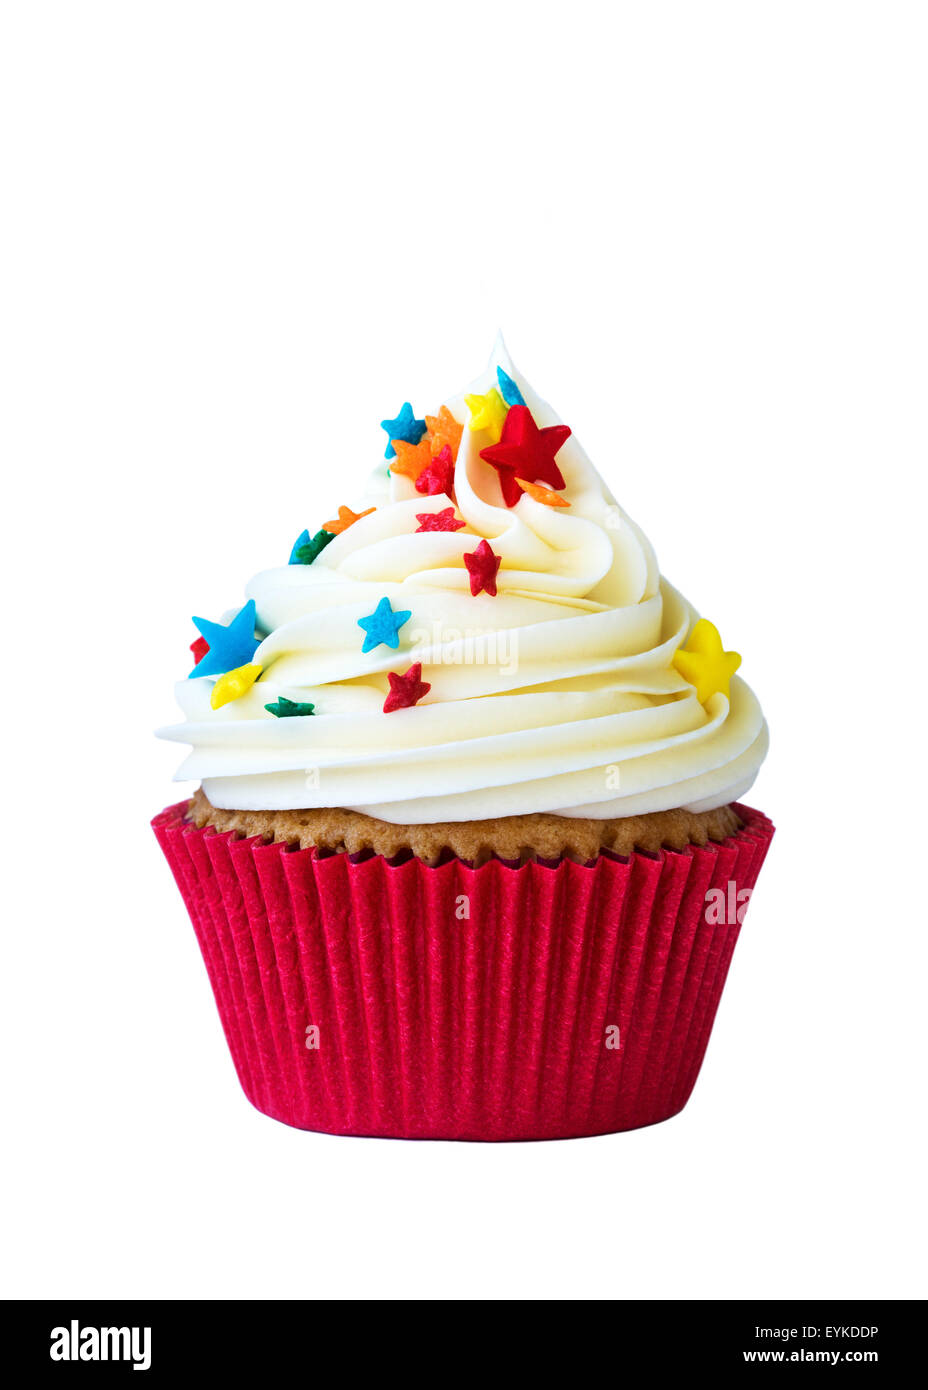 Cupcake isolated on white Banque D'Images